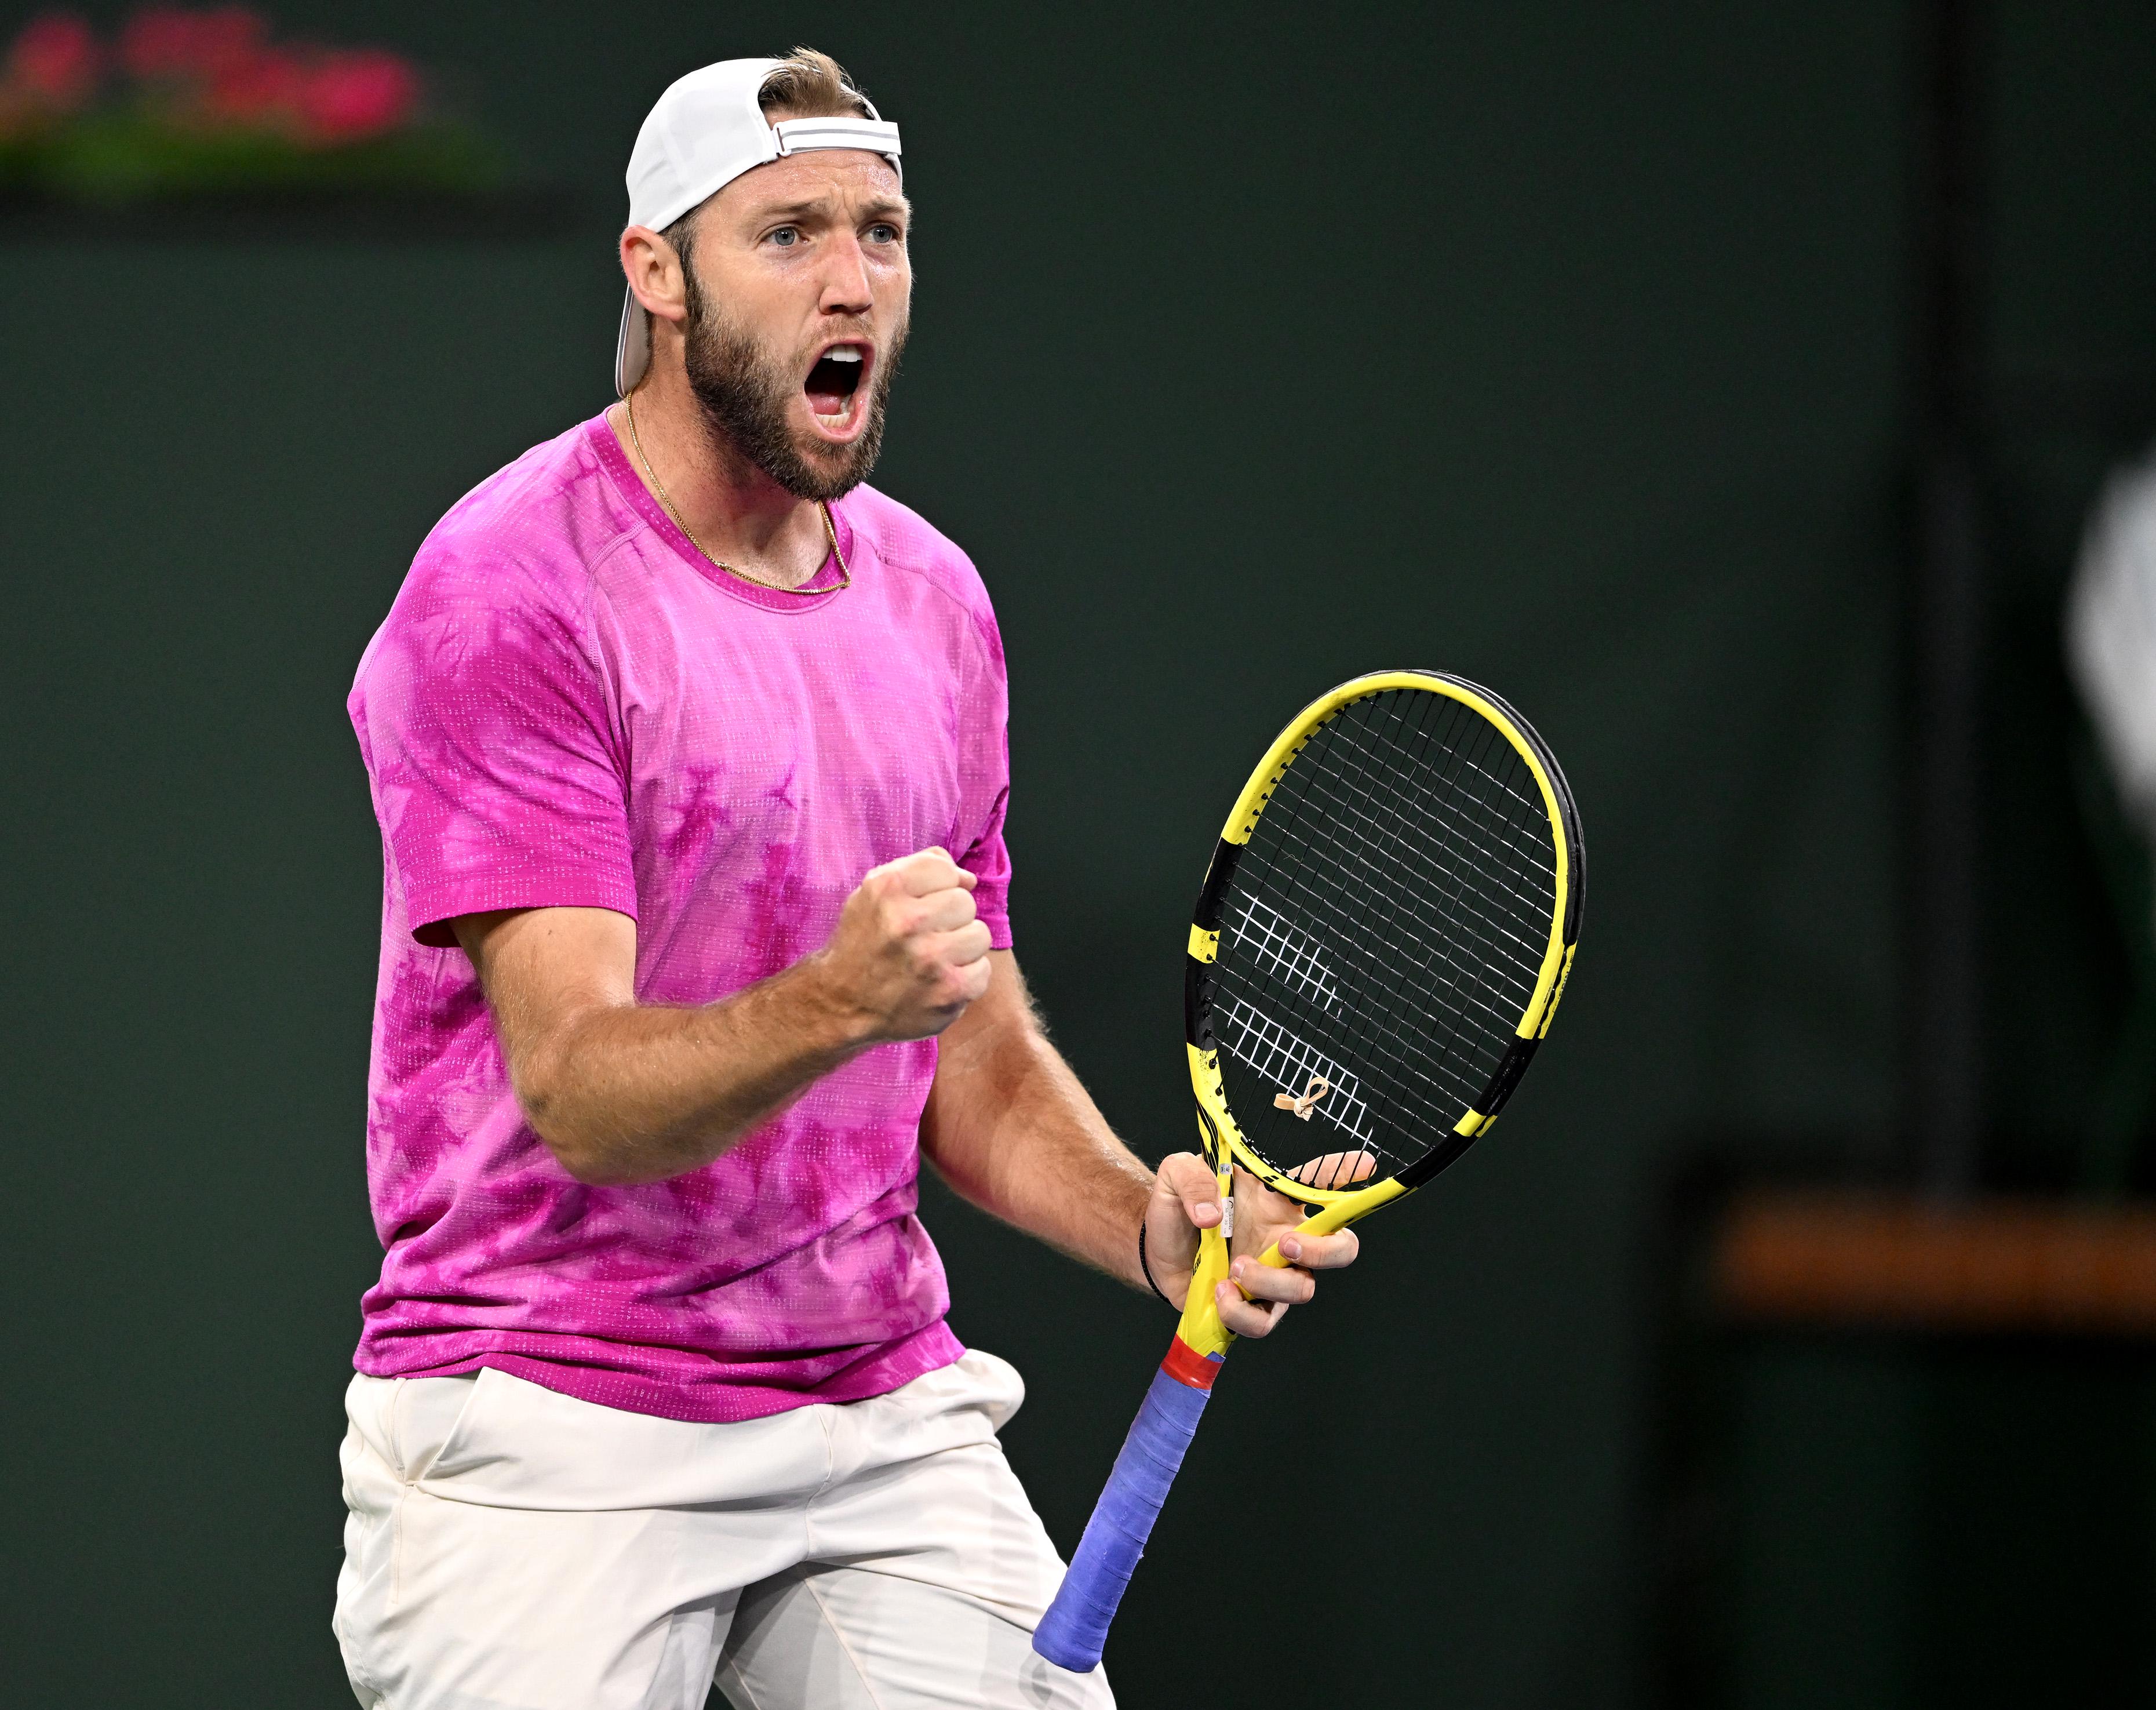 Maxime Cressy vs Jack Sock Odds, Prediction and Betting Trends for 2022 Wimbledon Men's Round 2 Match